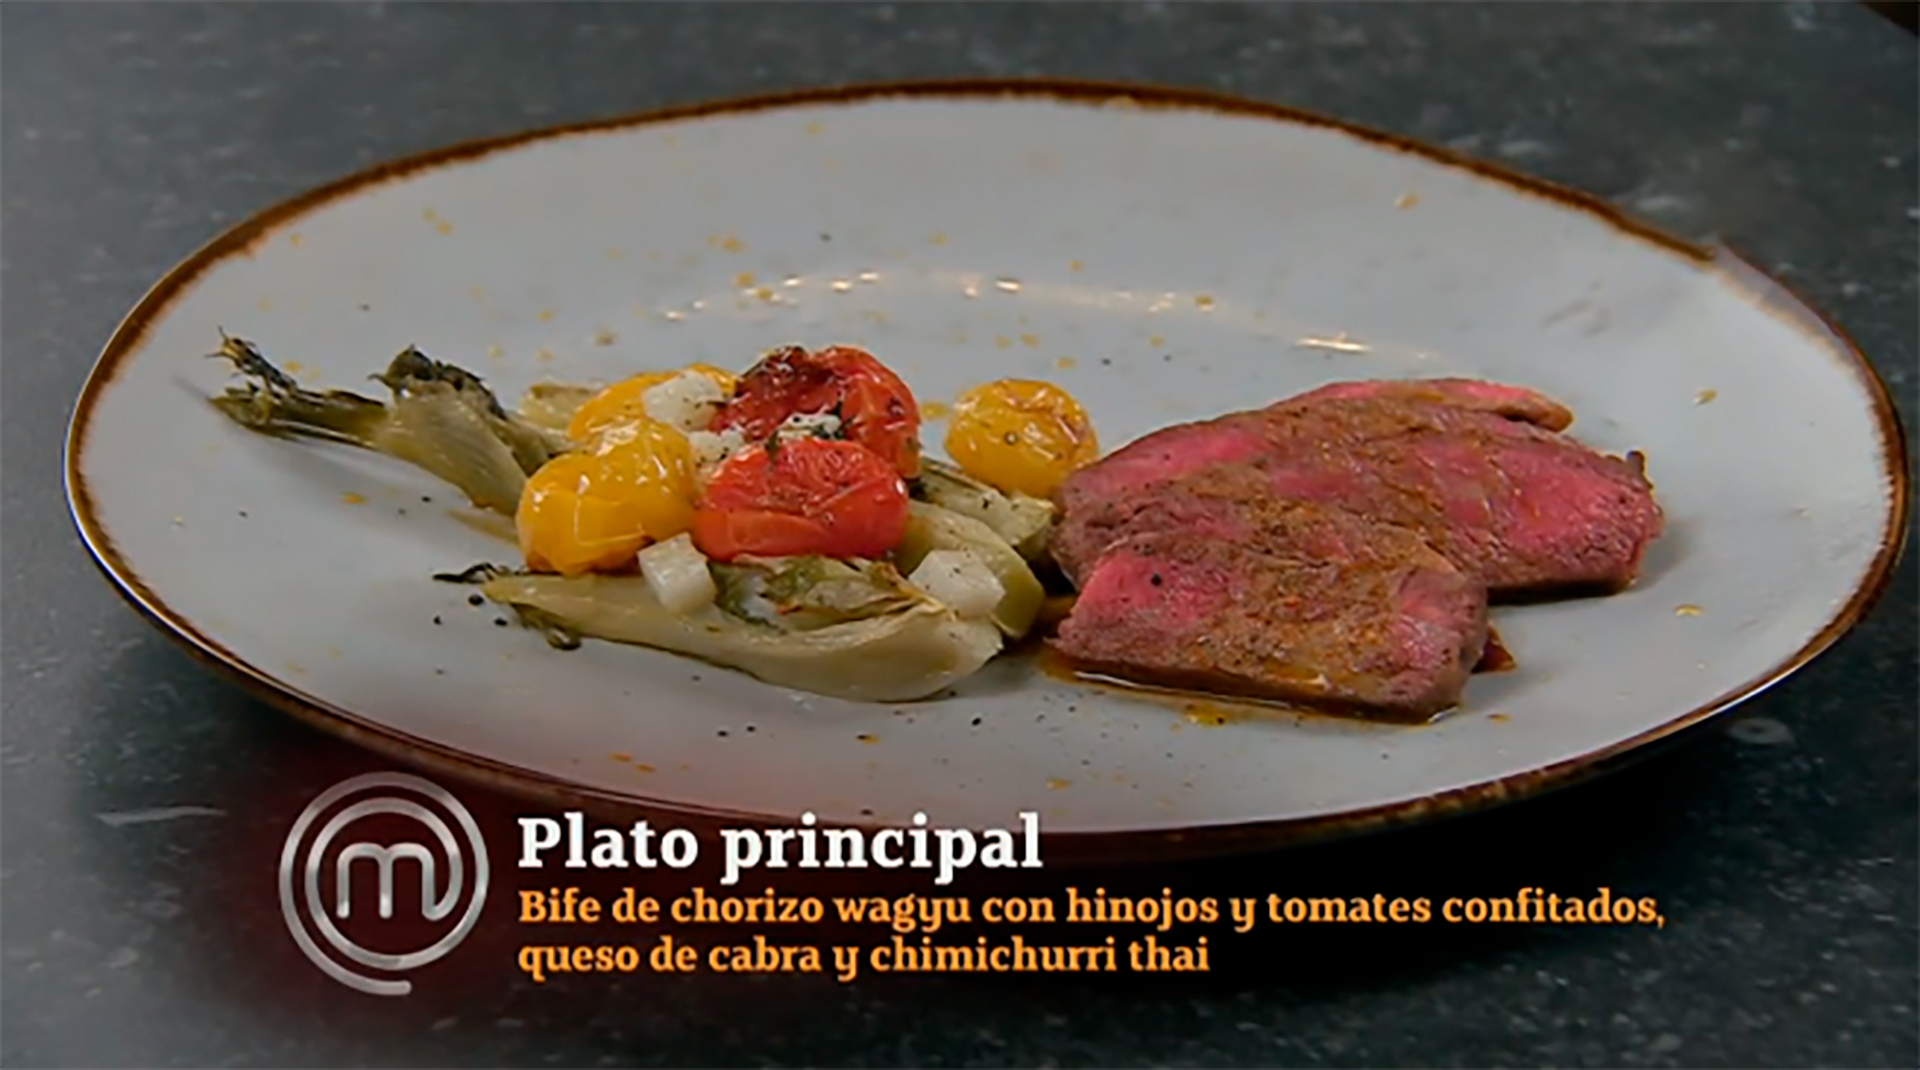 The main course presented by Tomás Fonzi in the Masterchef Celebrity 3 grand finale